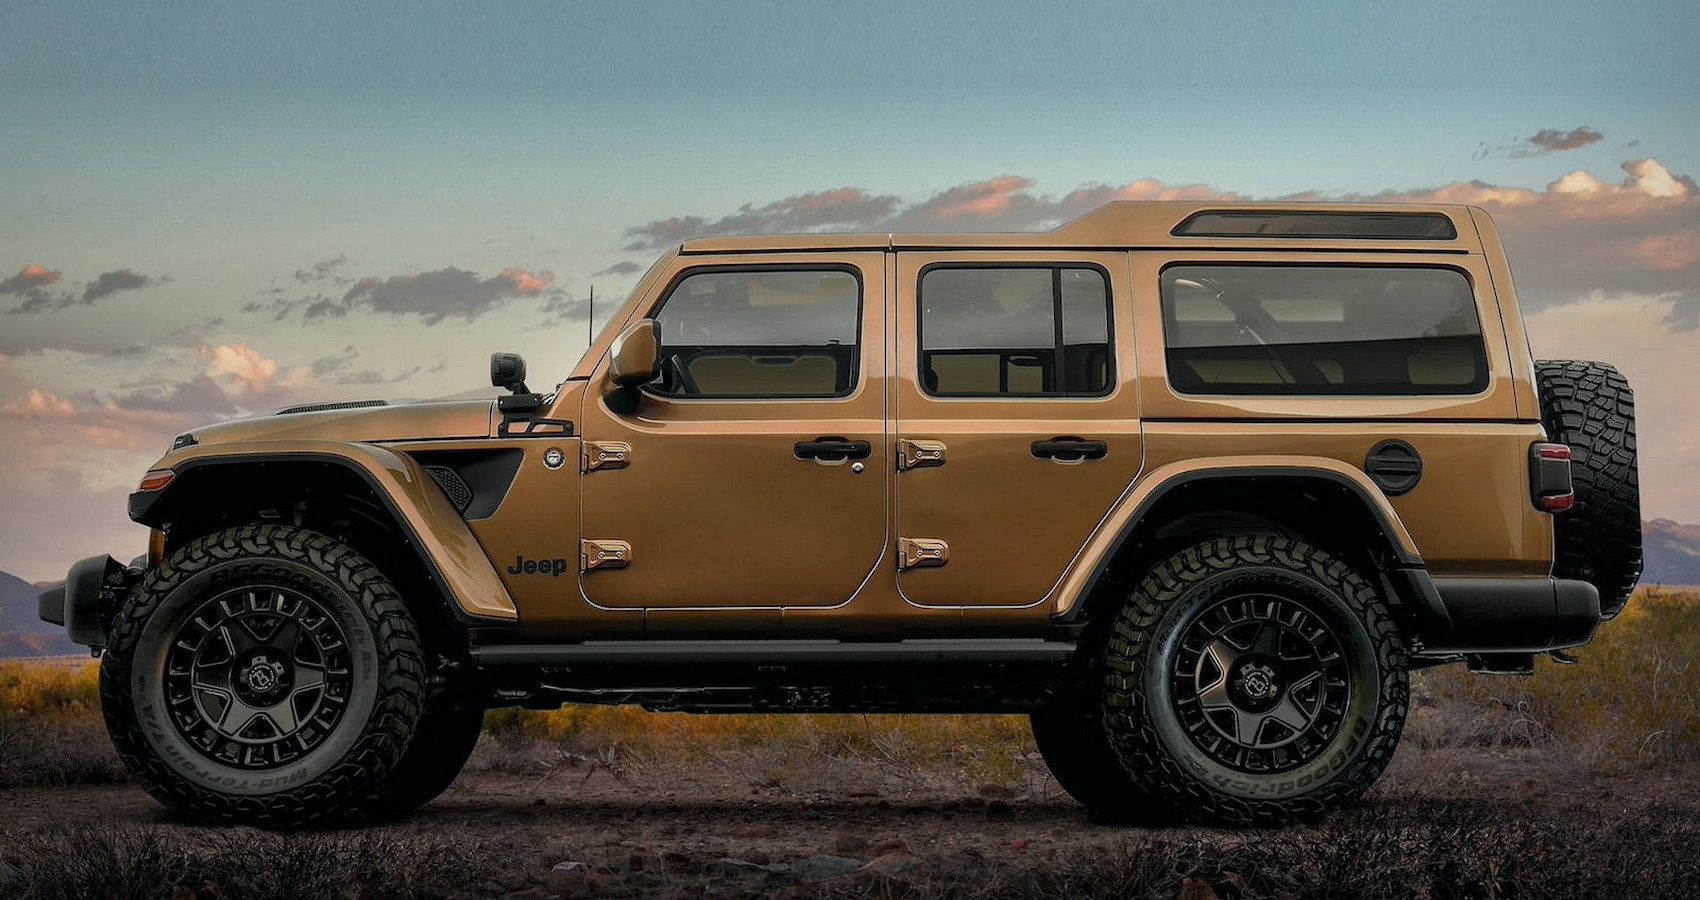 The Jeep Wrangler Overlook Concept Is The ThreeRow SUV We Desperately Crave